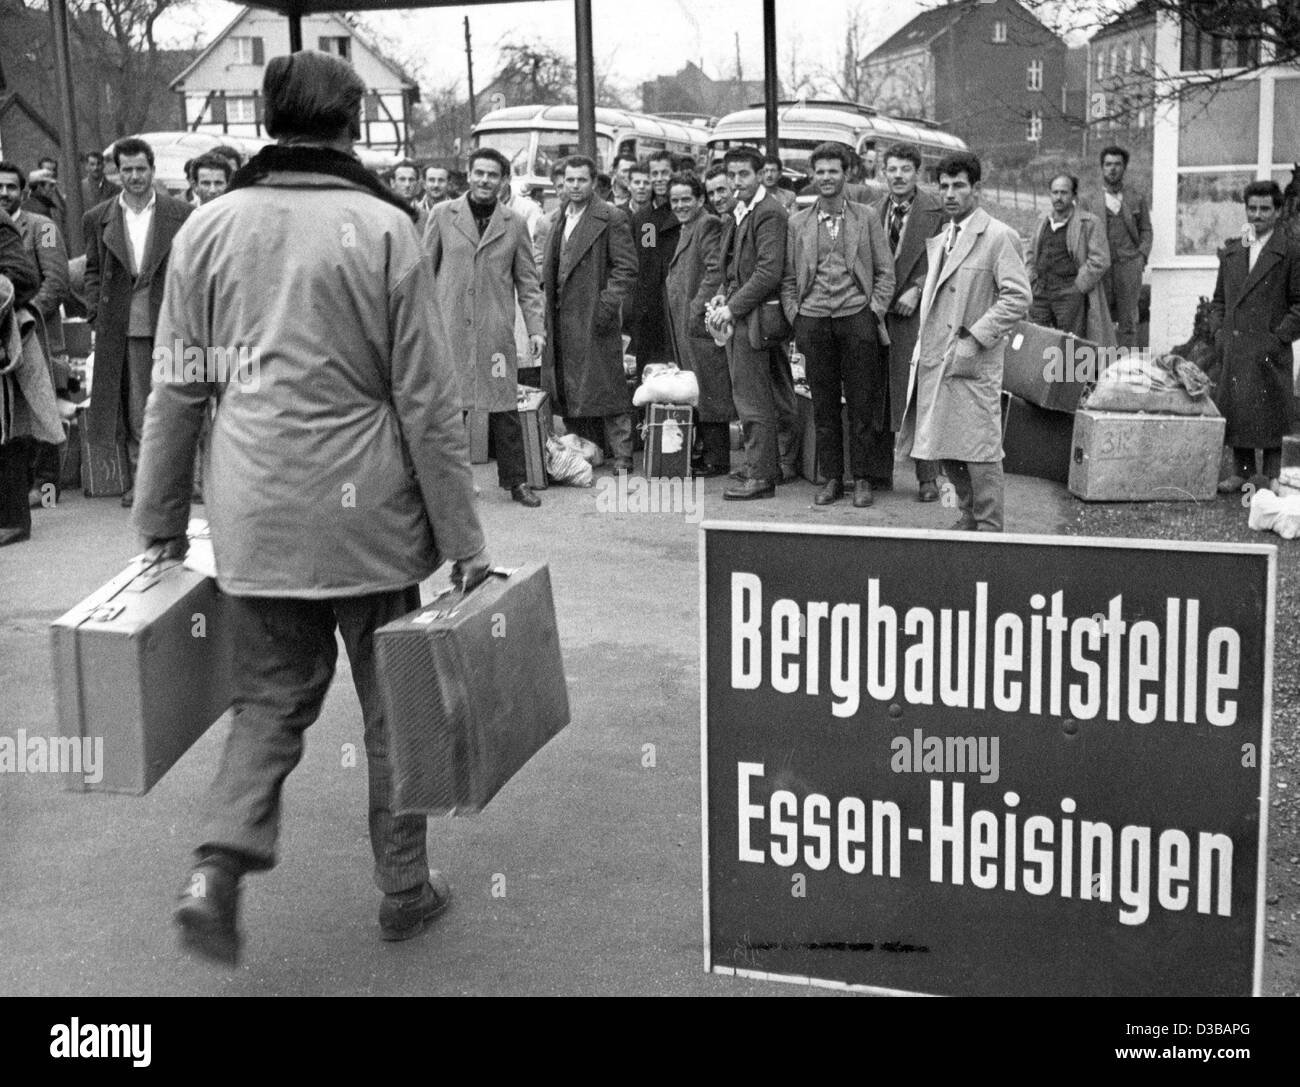 (dpa files) - 362 Greek workers who want to work as miners in the Ruhr Basin arrive at the mining headquarters (Bergbauleitstelle) in Essen-Heisingen, West Germany, 22 November 1960. About 800 Greeks were already working in the German coal mines at that time. Stock Photo